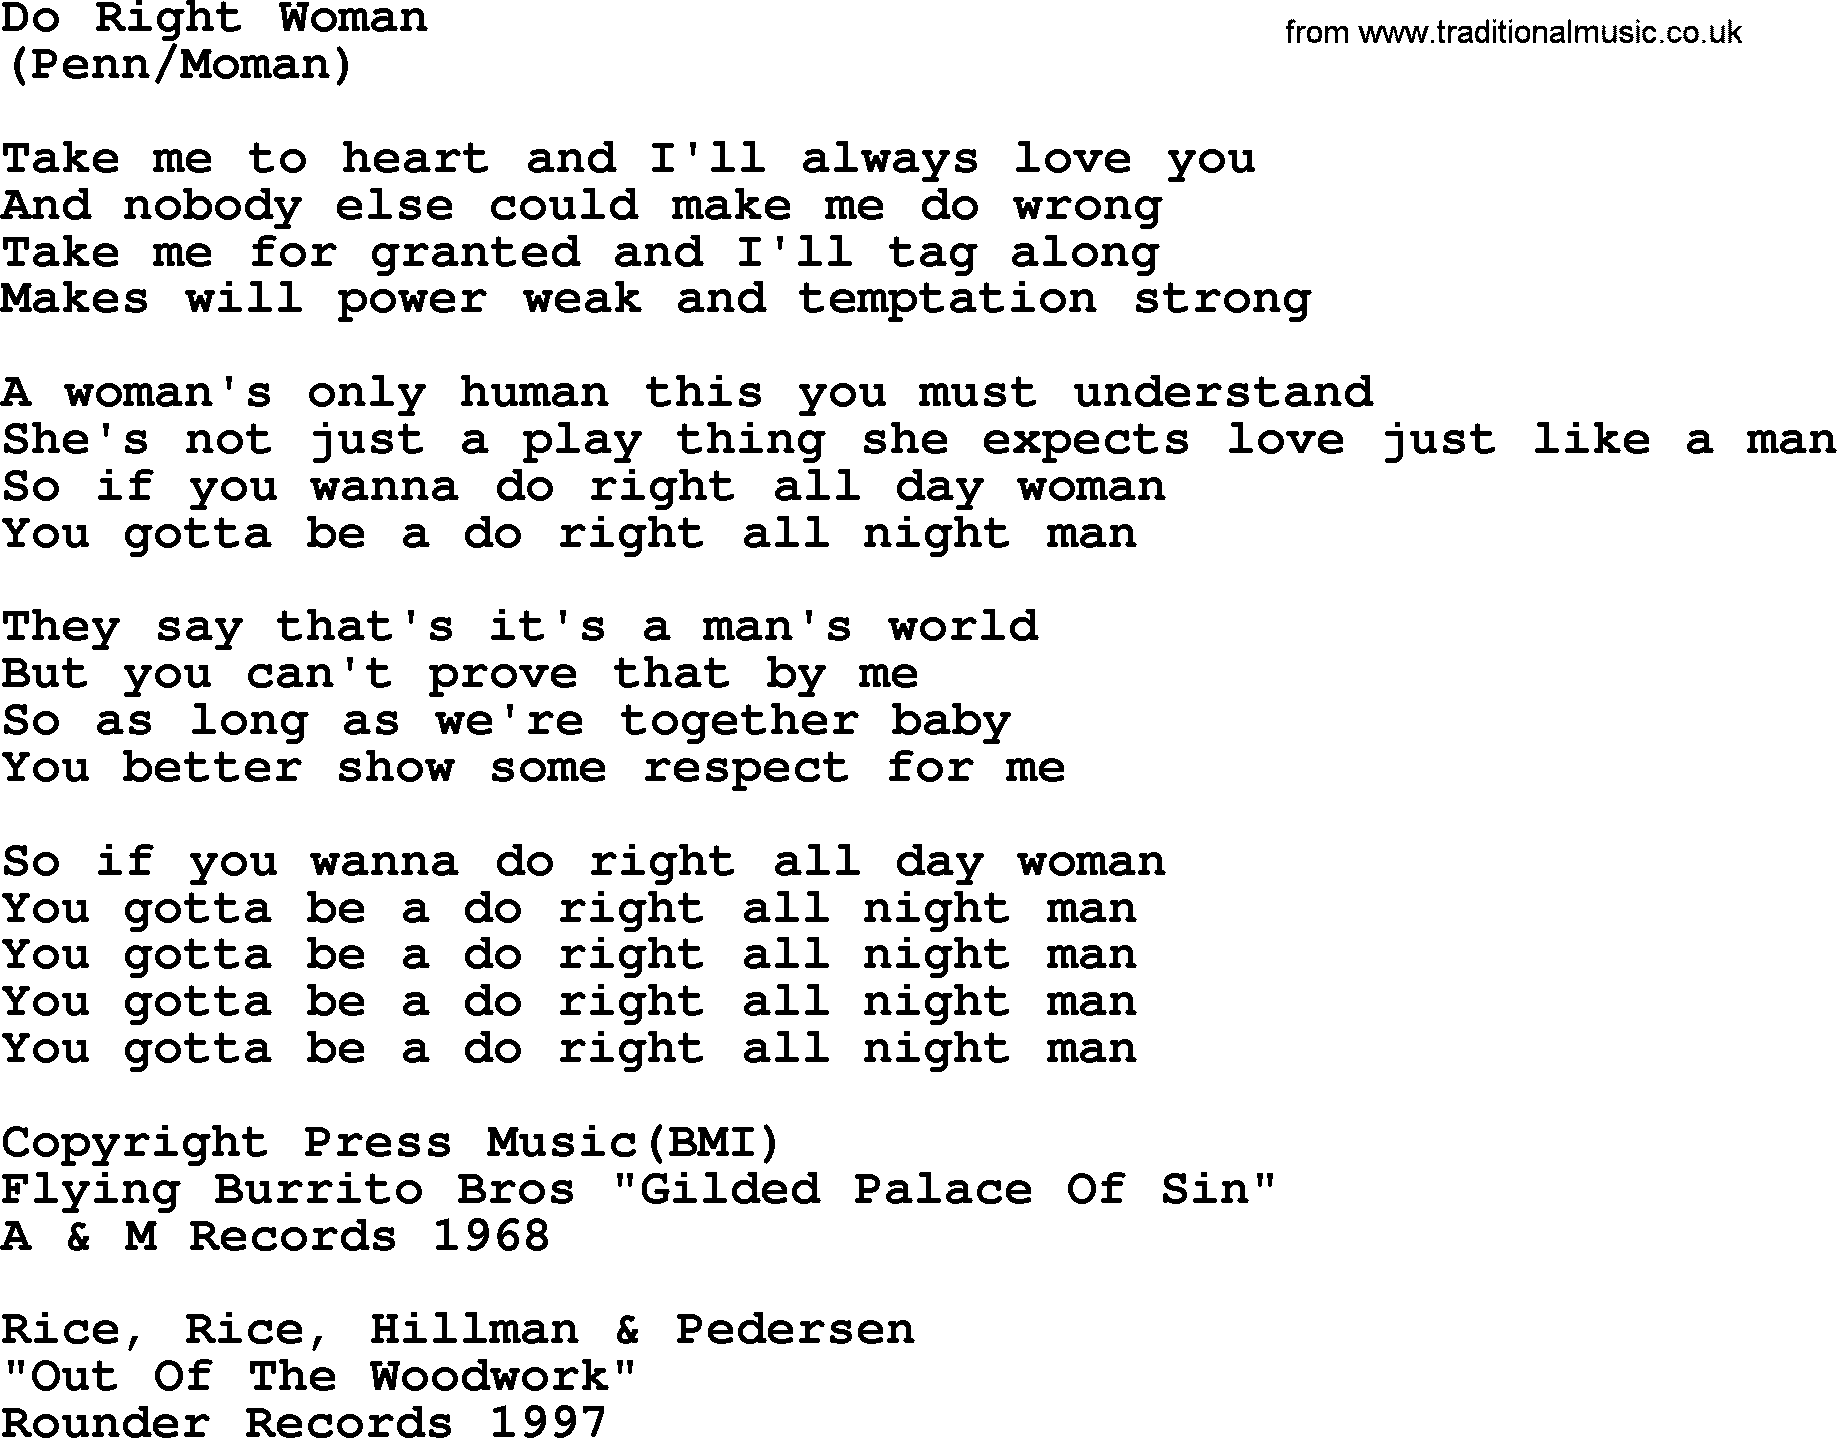 The Byrds song Do Right Woman, lyrics